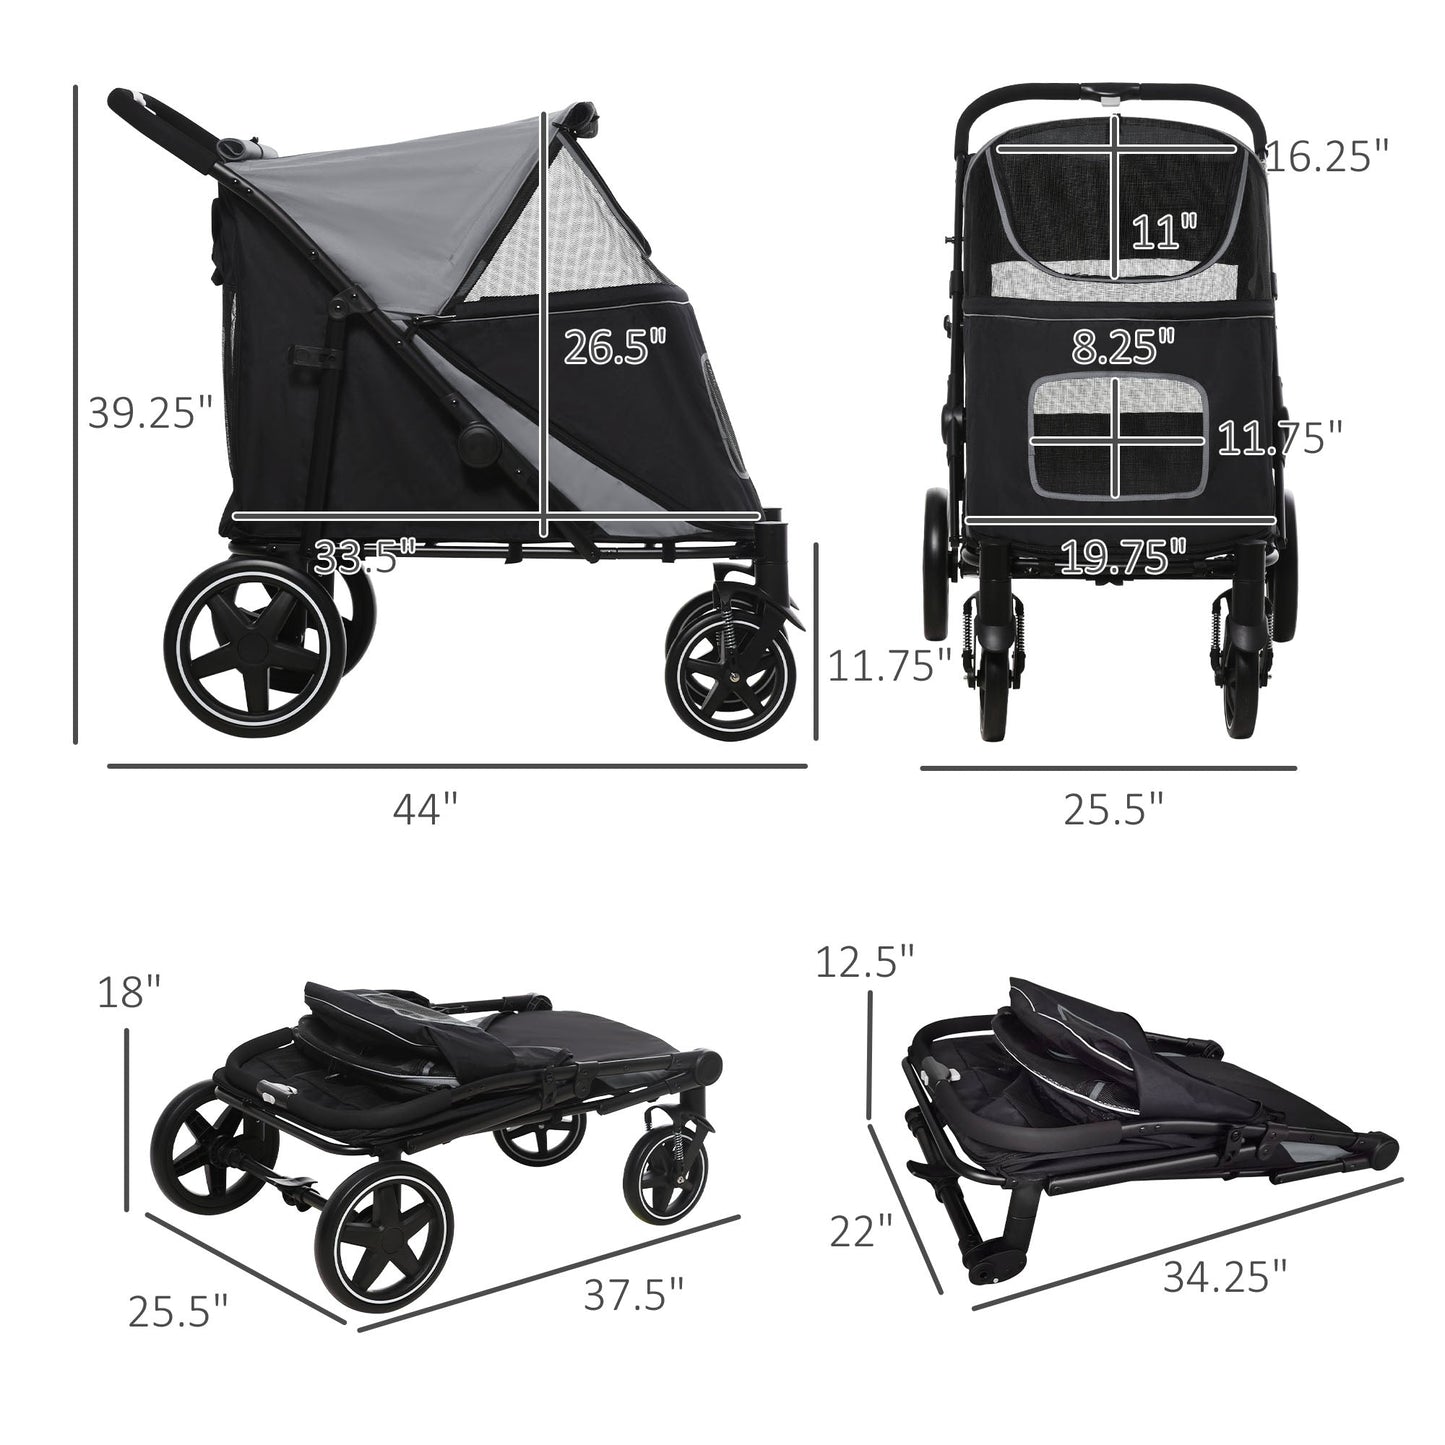 Pet Supplies-Pet Stroller with Universal Front Wheels, Shock Absorber, One Click Foldable Dog Cat Carriage with Brakes, Storage Bags, Mesh Window - Grey - Outdoor Style Company